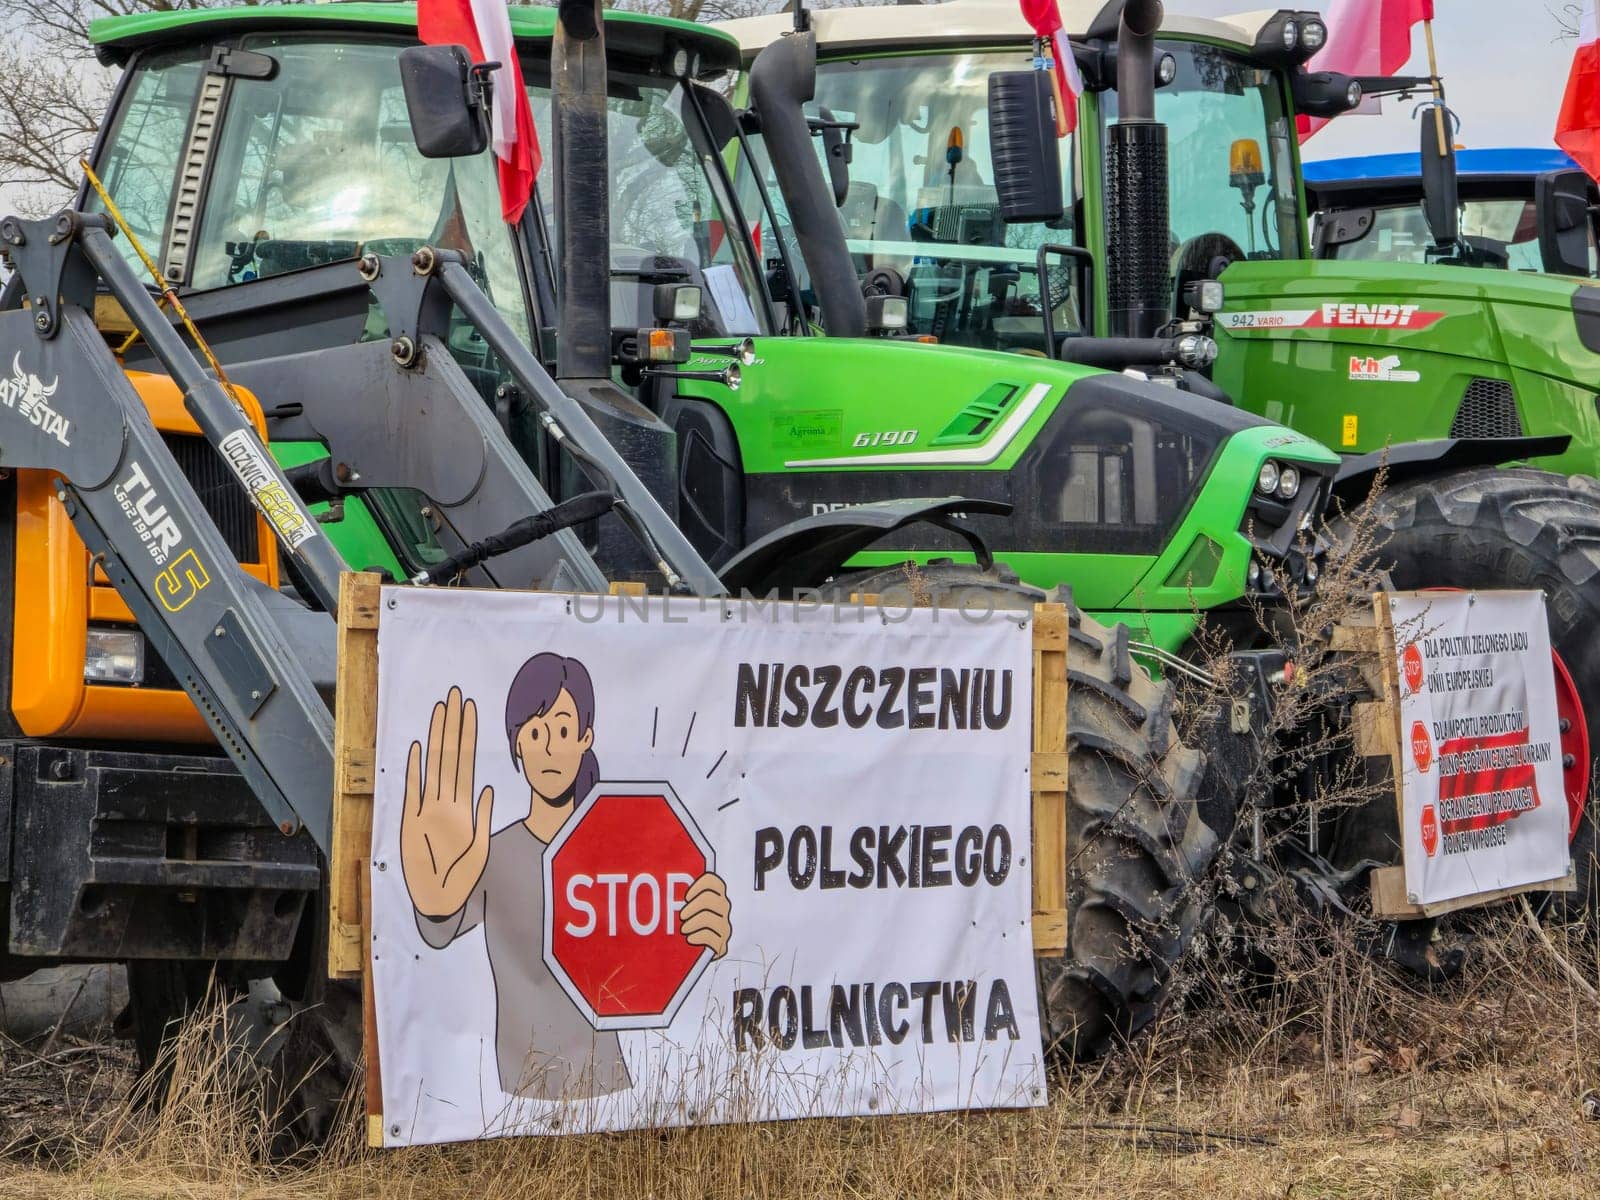 Wroclaw, Poland, February 15, 2024: Protesting farmers with slogans on banners. Hundreds of agricultural tractors lined up in Wroclaw